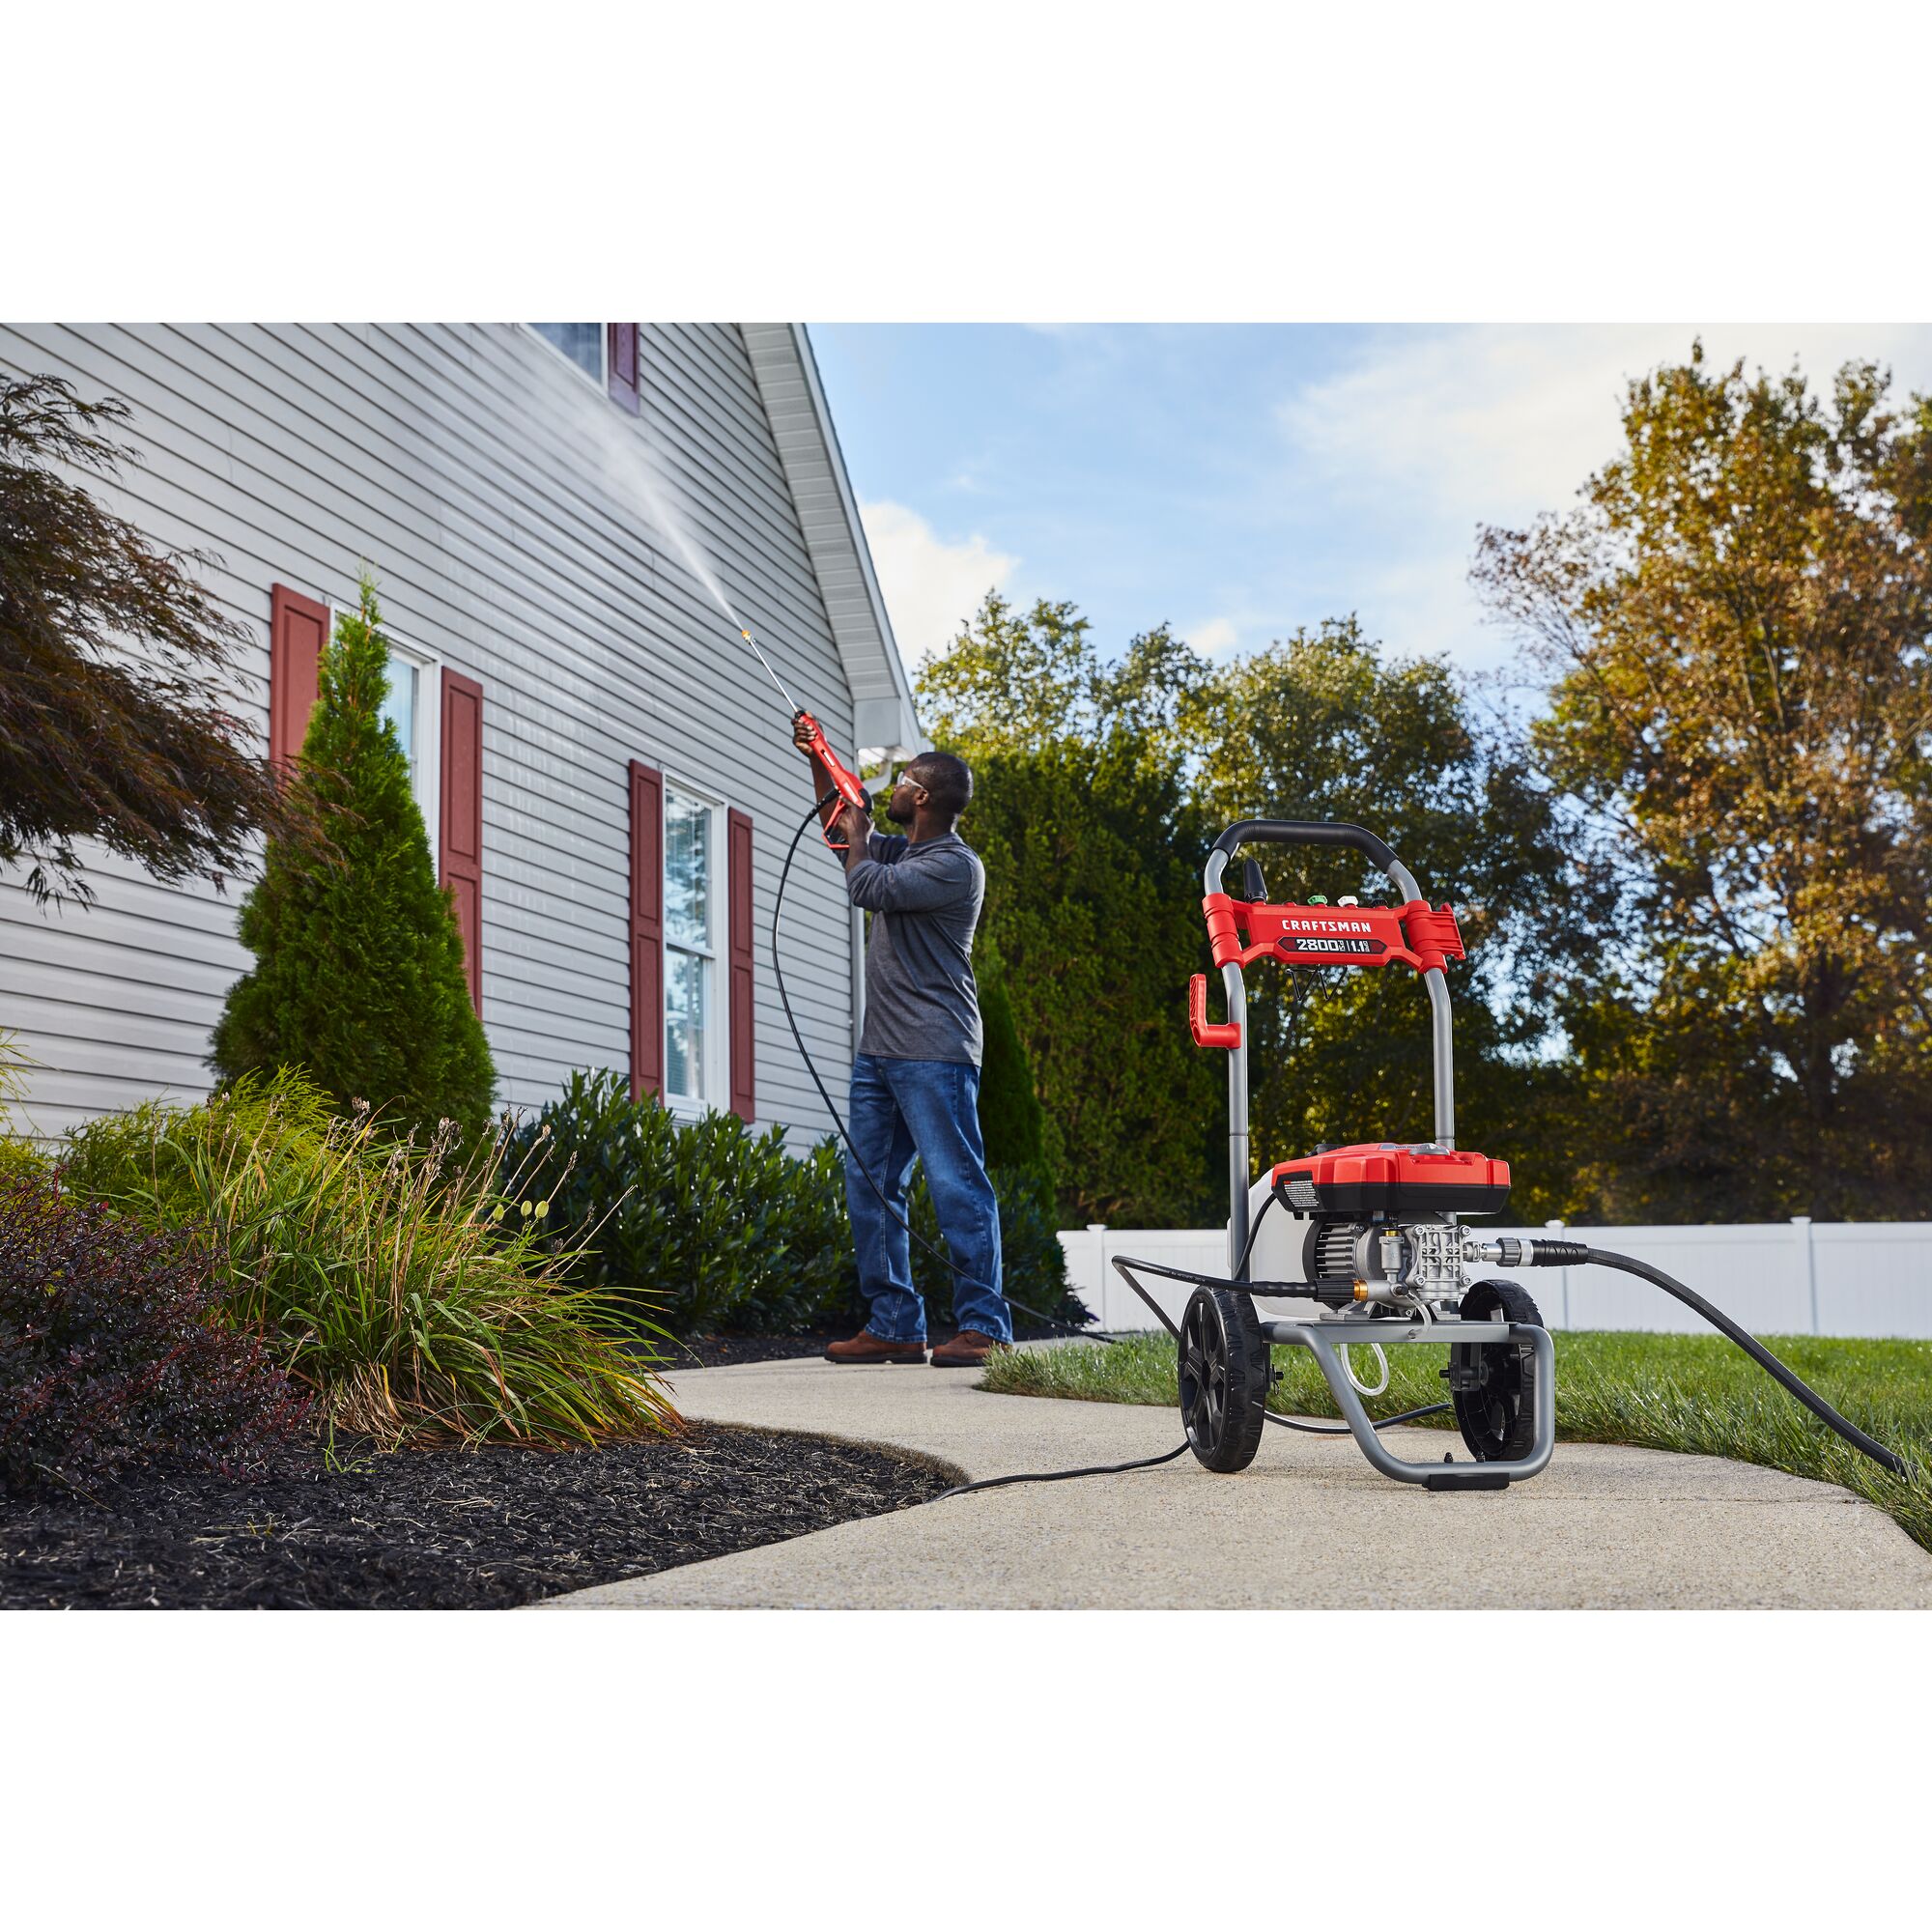 CRAFTSMAN 2800 Pressure Washer pressure washing second story of home with shrubs and fence